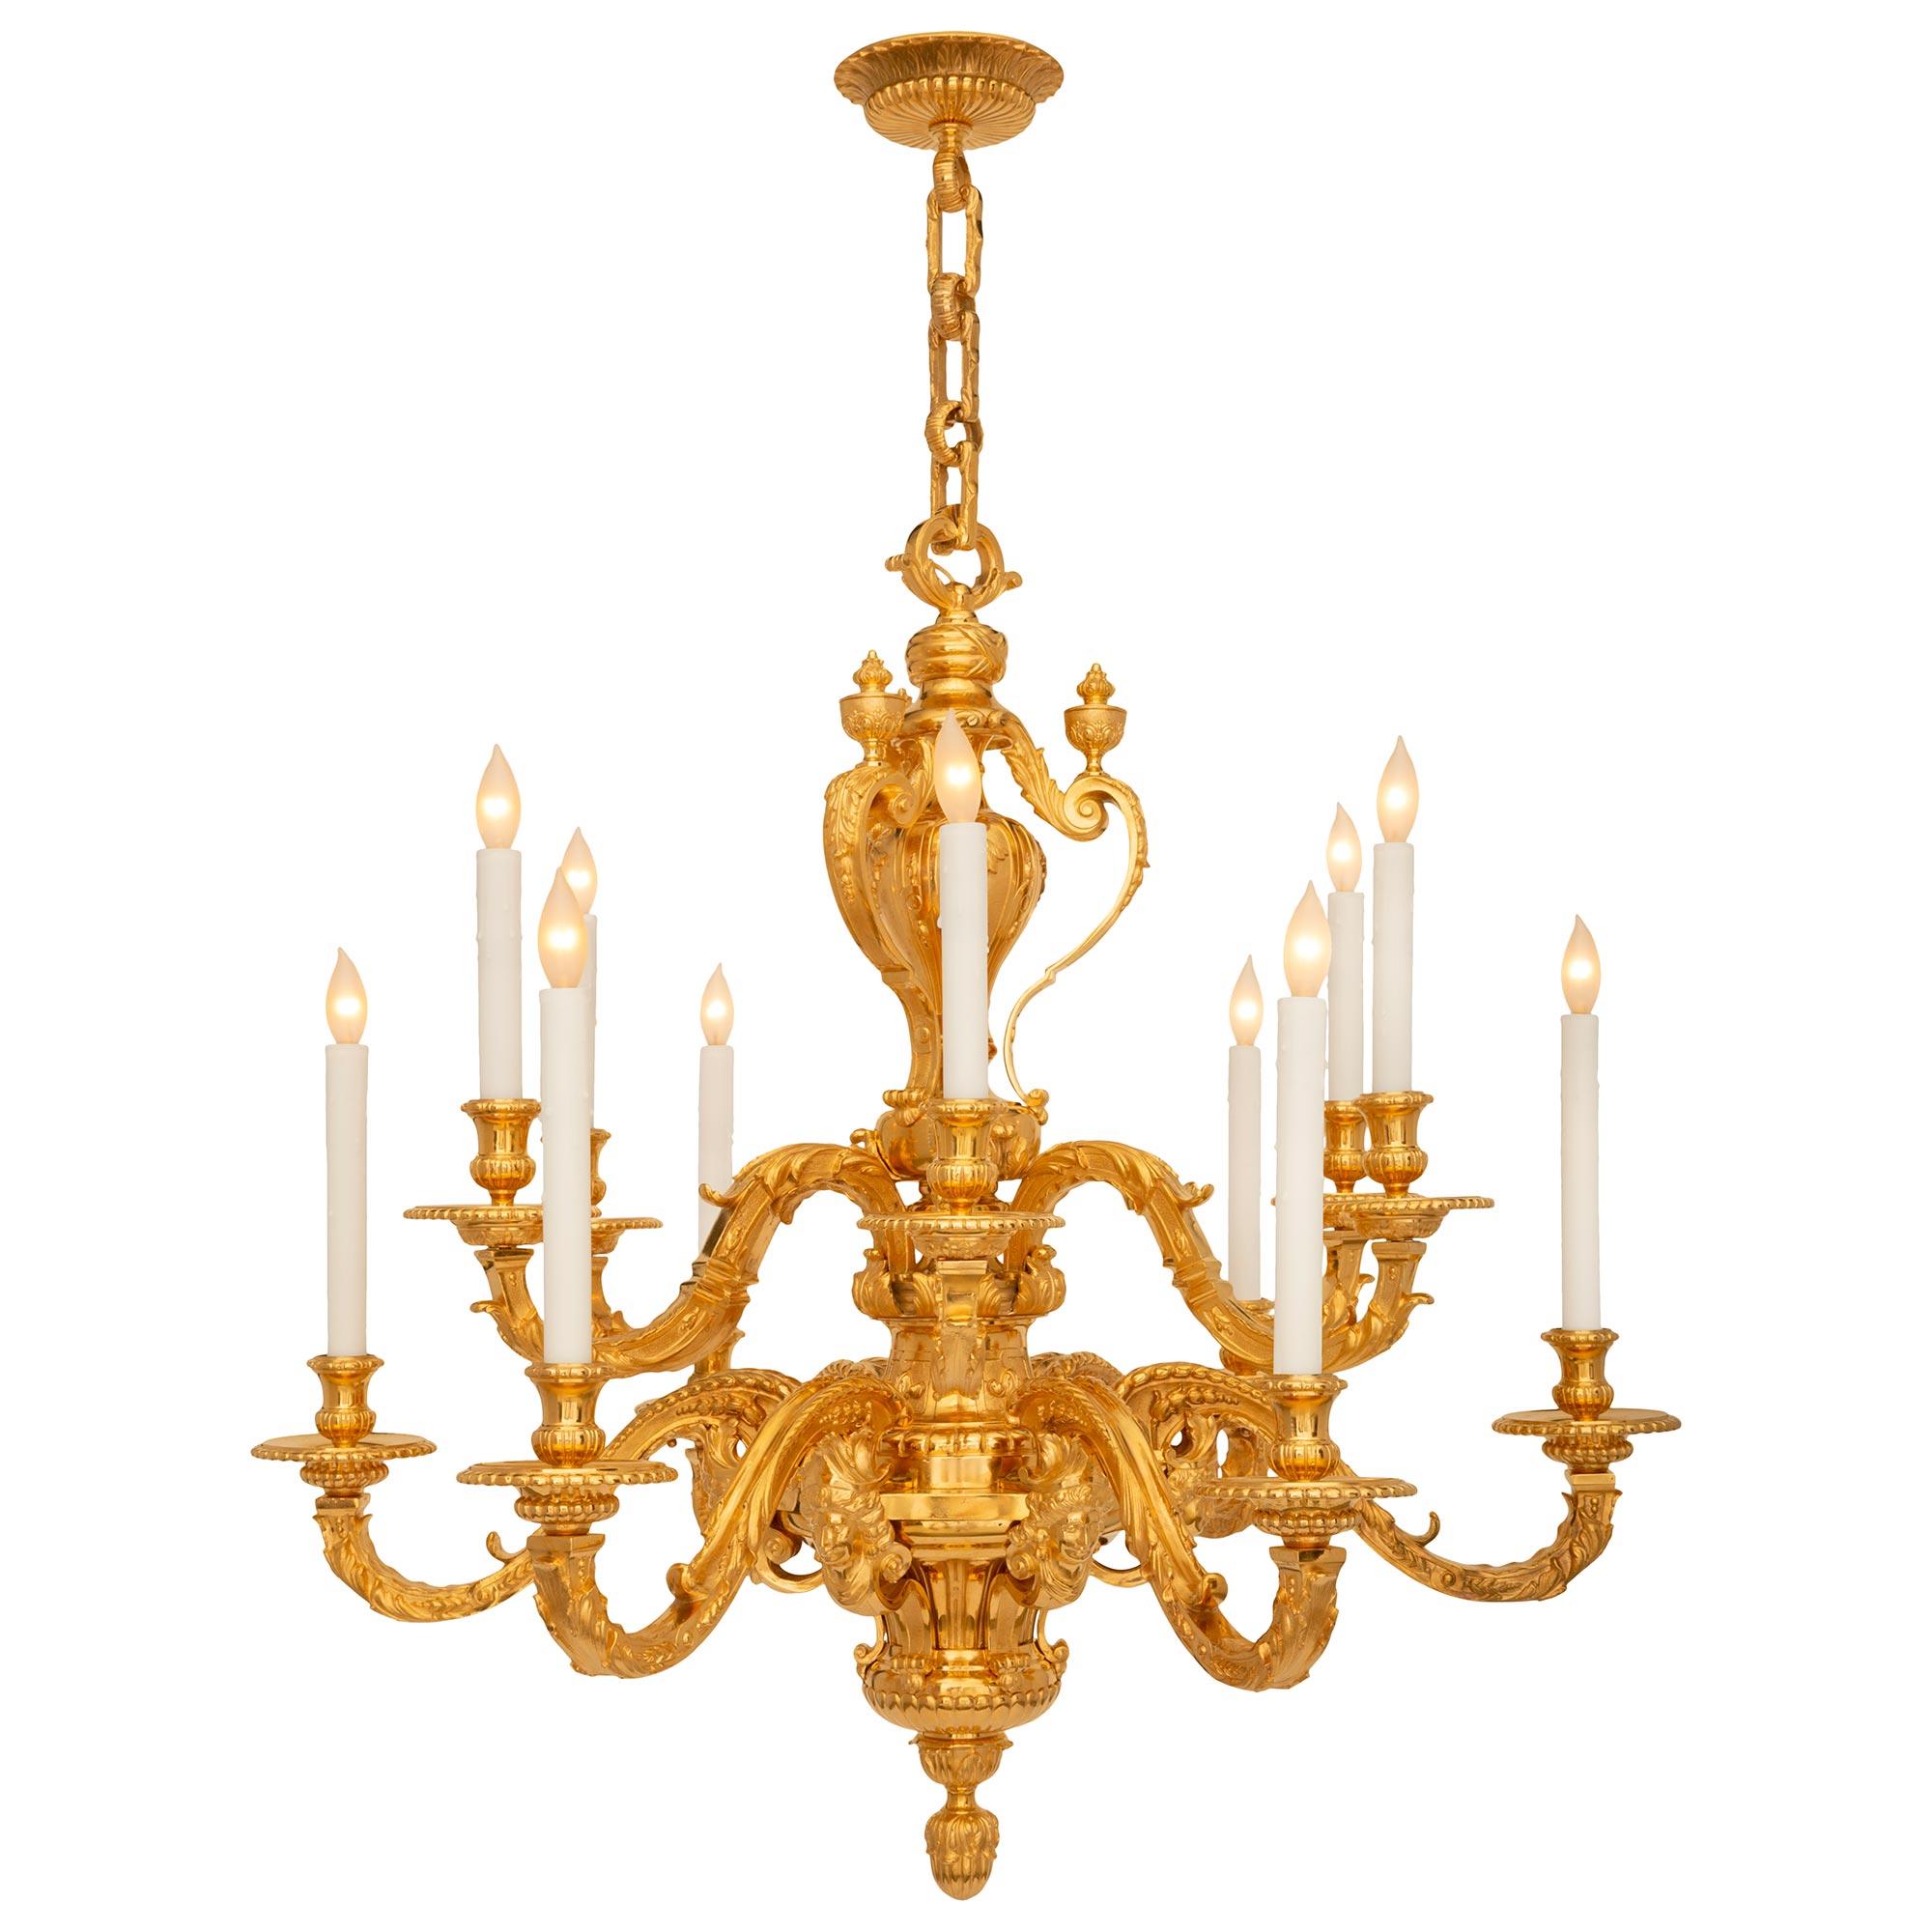 An impressive and large scale French 19th century Louis XIV st. ormolu chandelier. The twelve arm chandelier is centered by a striking bottom foliate finial below the reeded and elegantly curved body with exceptional scrolled movements with